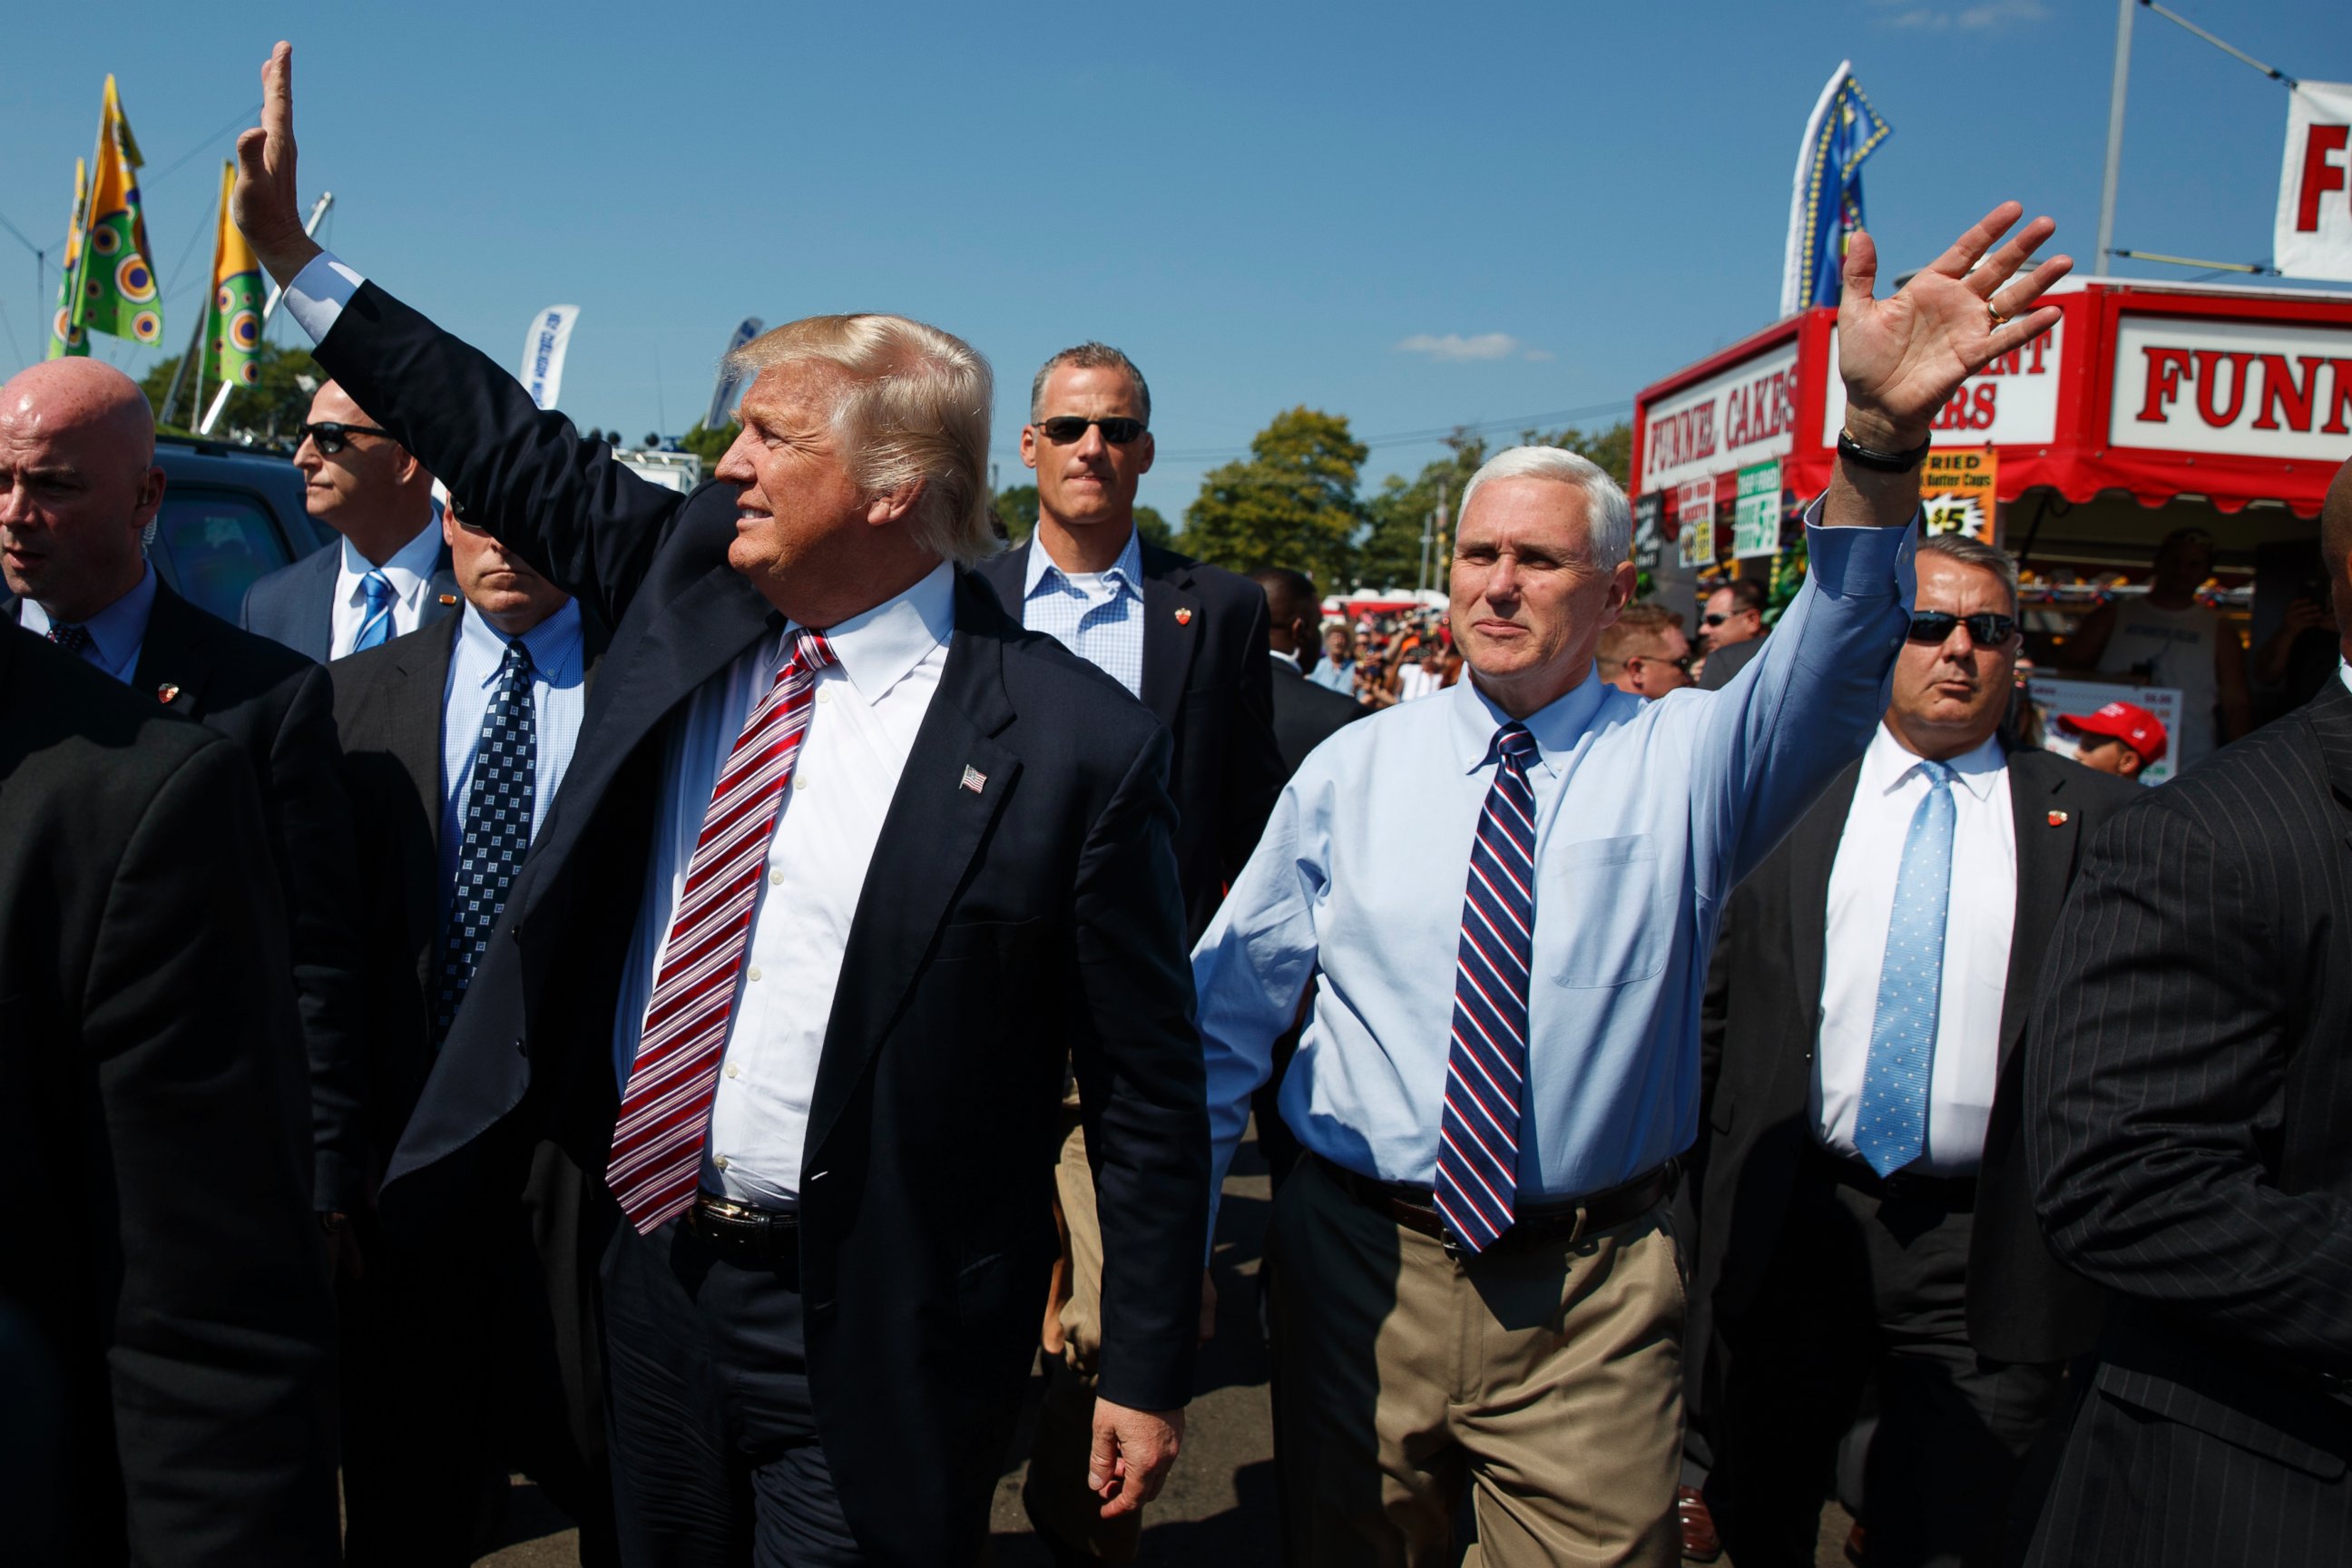 PHOTO:Republican presidential candidate Donald Trump, center left, waves as he walks with vice presidential candidate Gov. Mike Pence, R-Ind., center right, during a visit to the Canfield Fair, Sept. 5, 2016, in Canfield, Ohio.